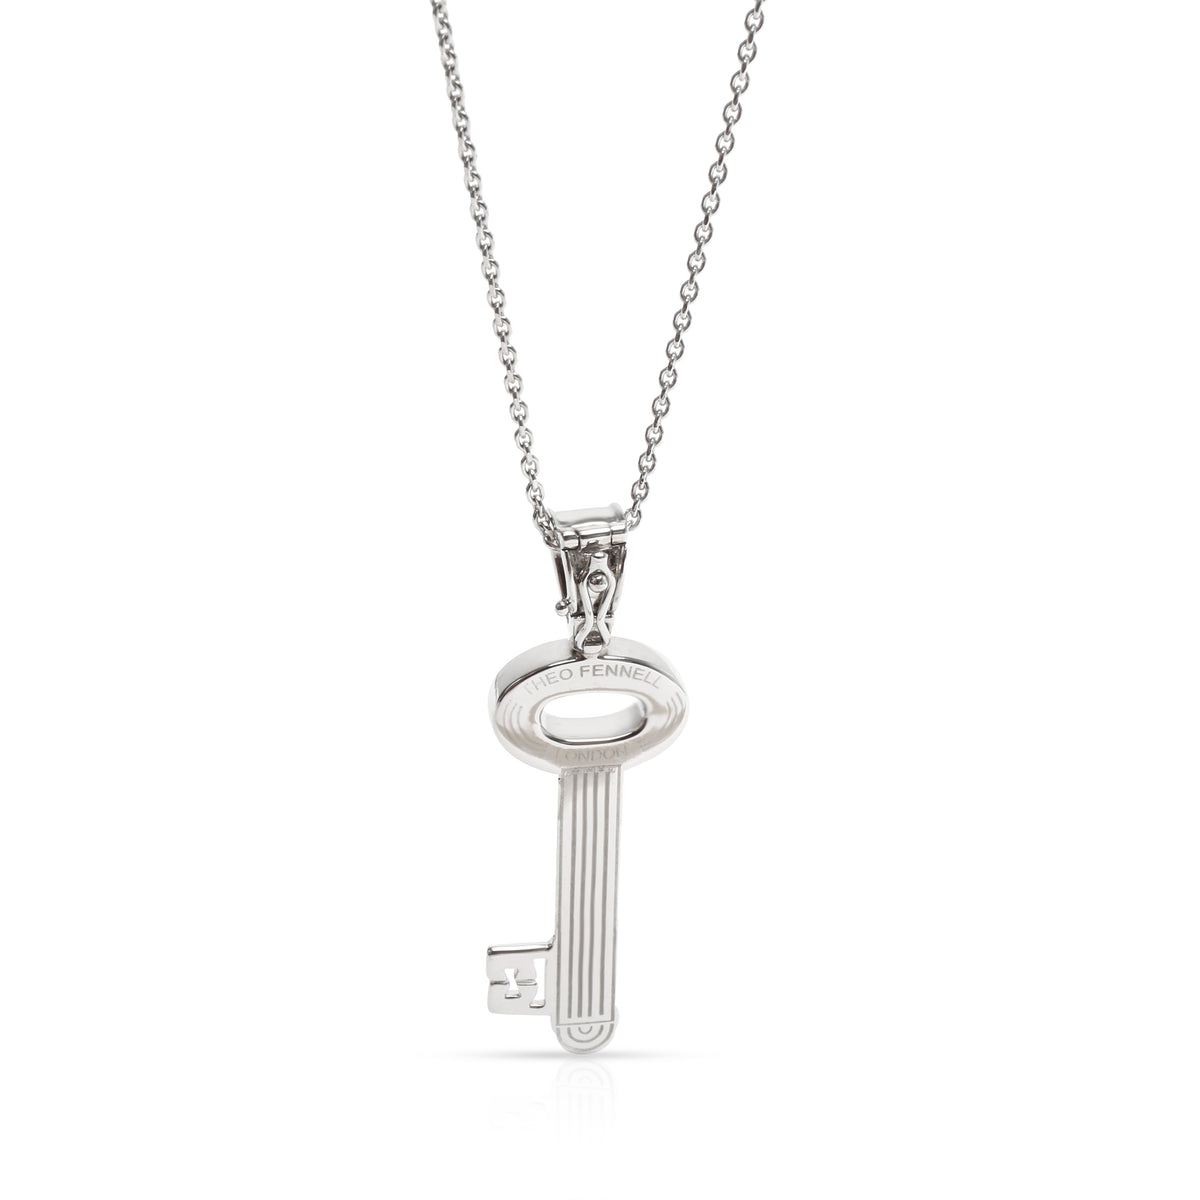 Theo Fennell Baby Key Diamond Necklace in 18K Gold (0.75 CTW)